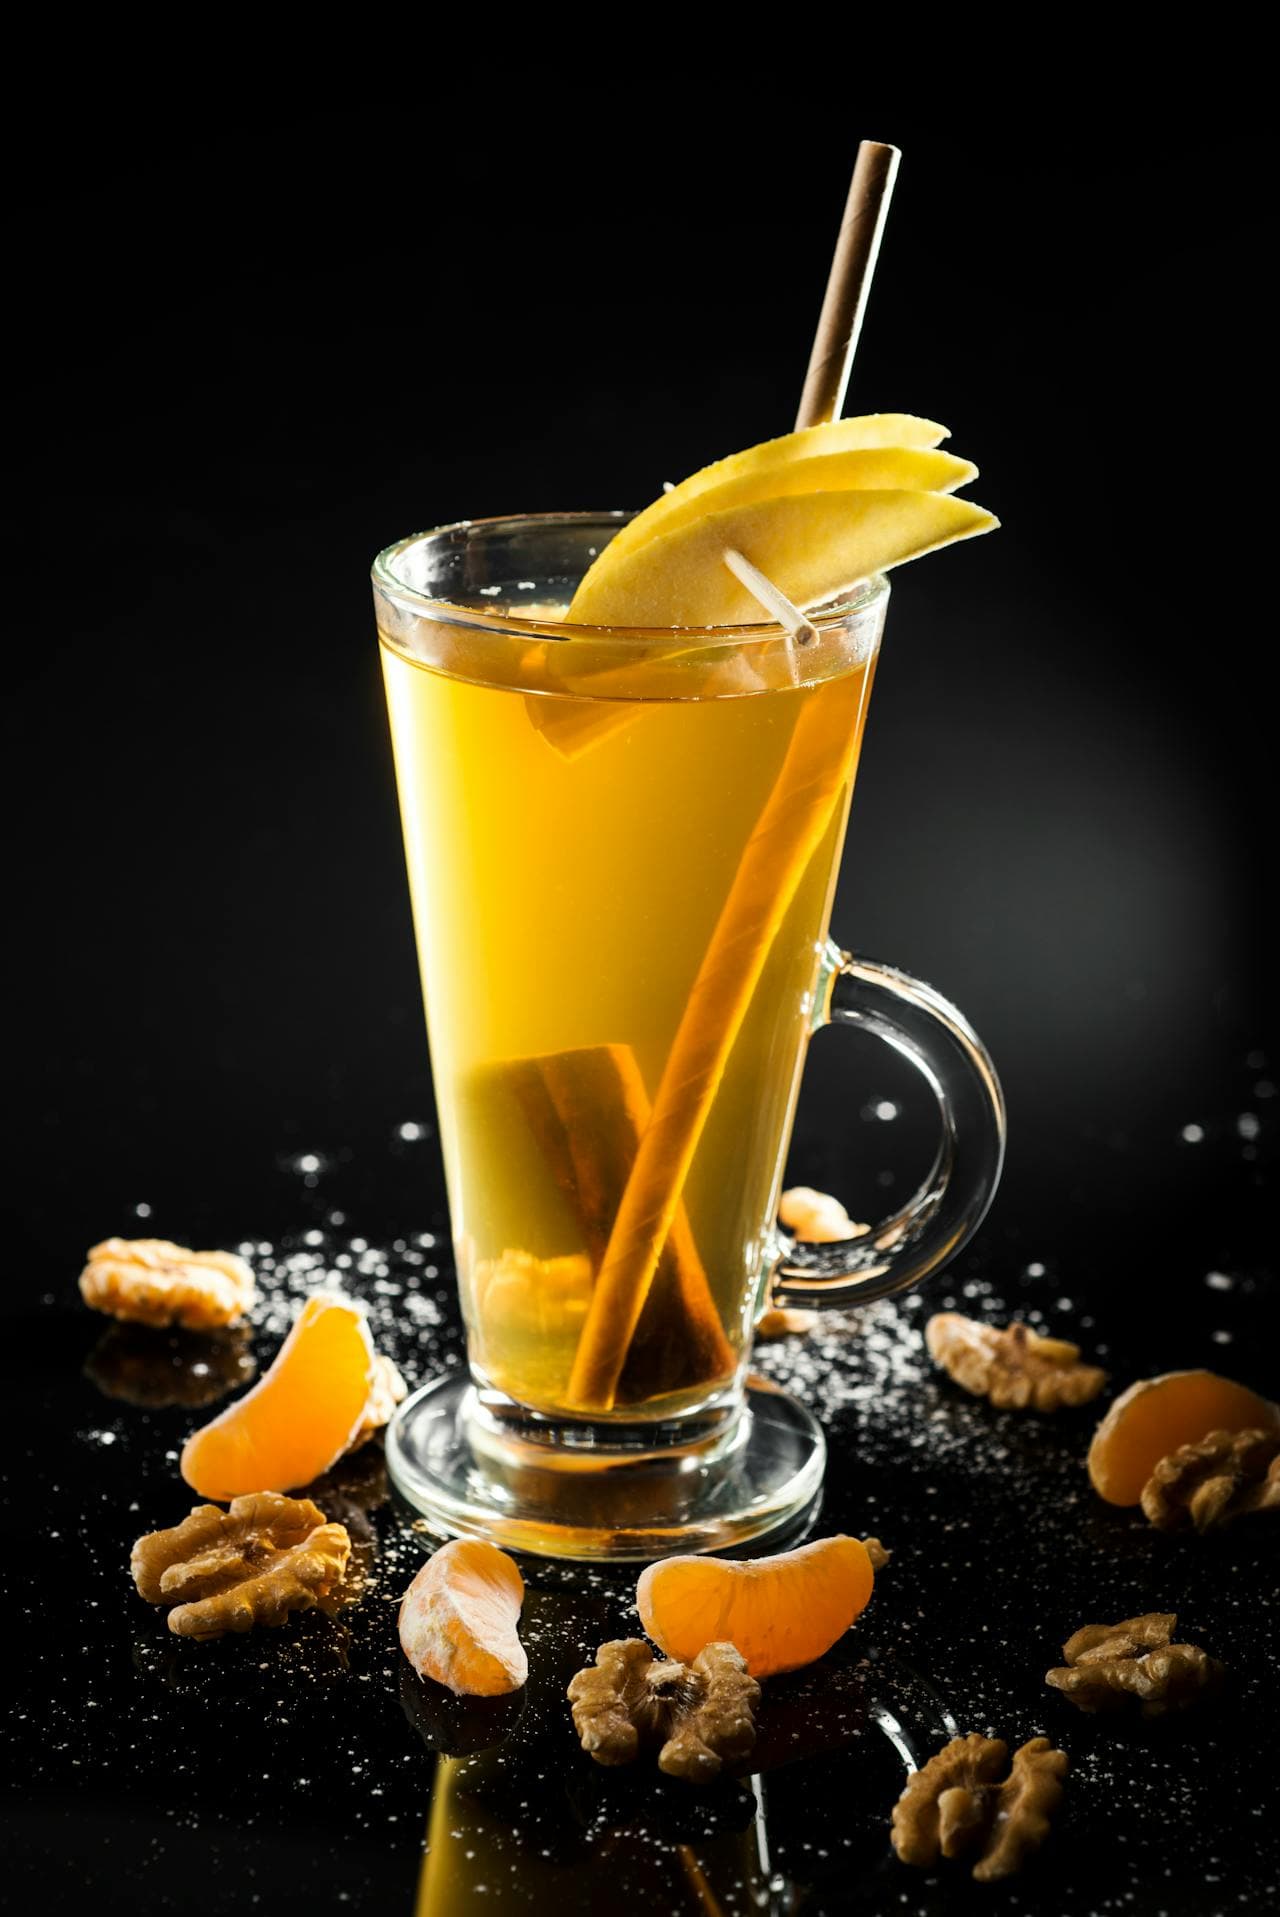 hot toddy cocktail